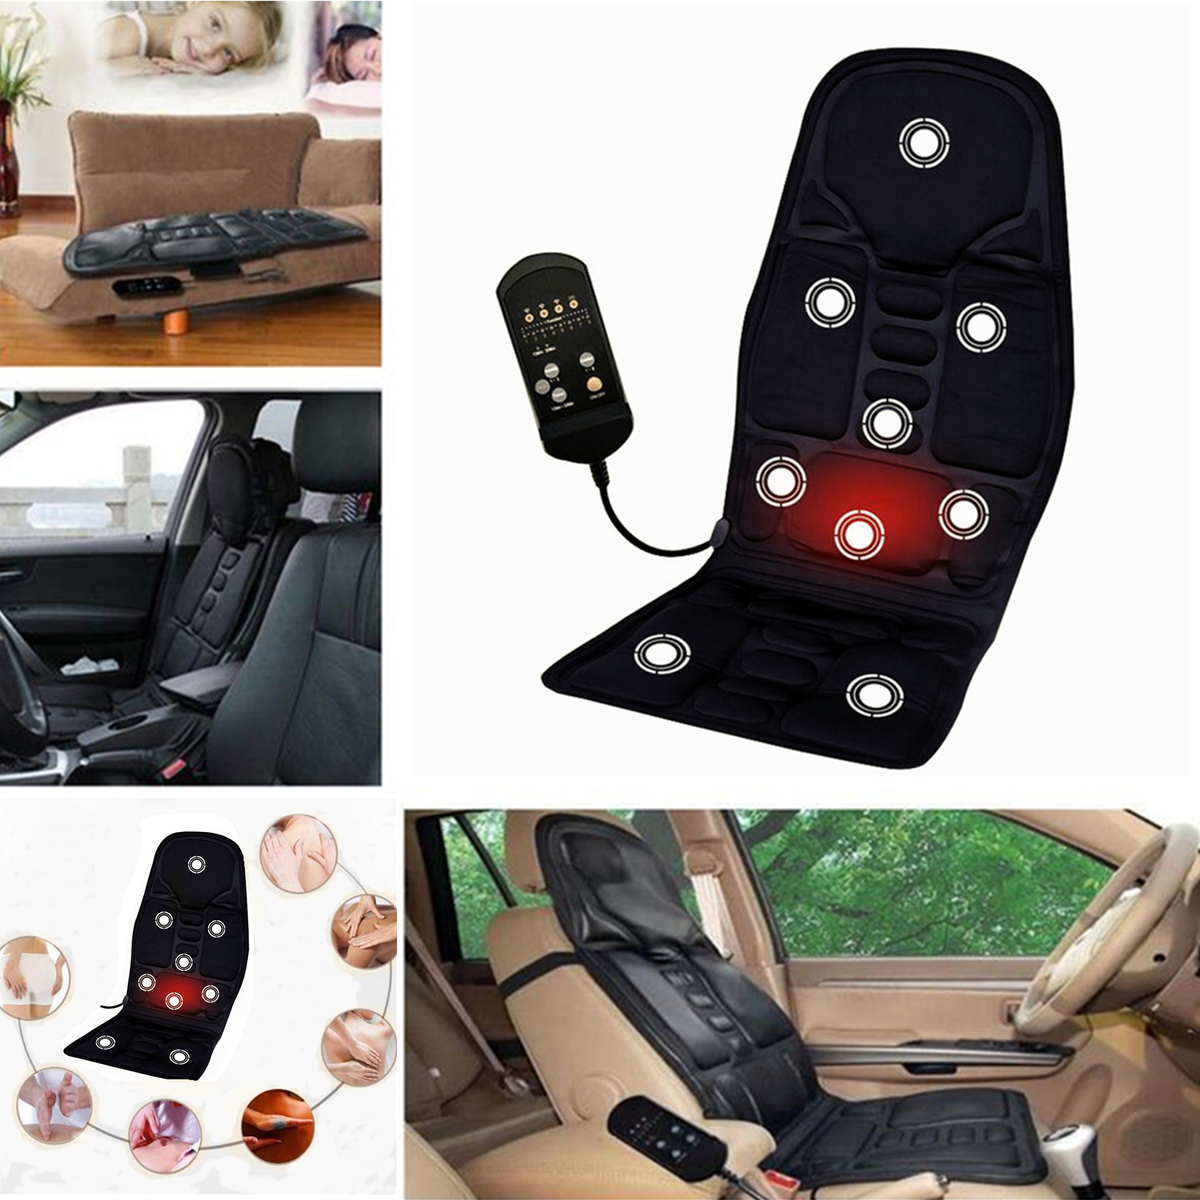 

12V Car Household Heated Full Body Massage Seat Cushion Back Lumbar Pain Relief Vibration Massager